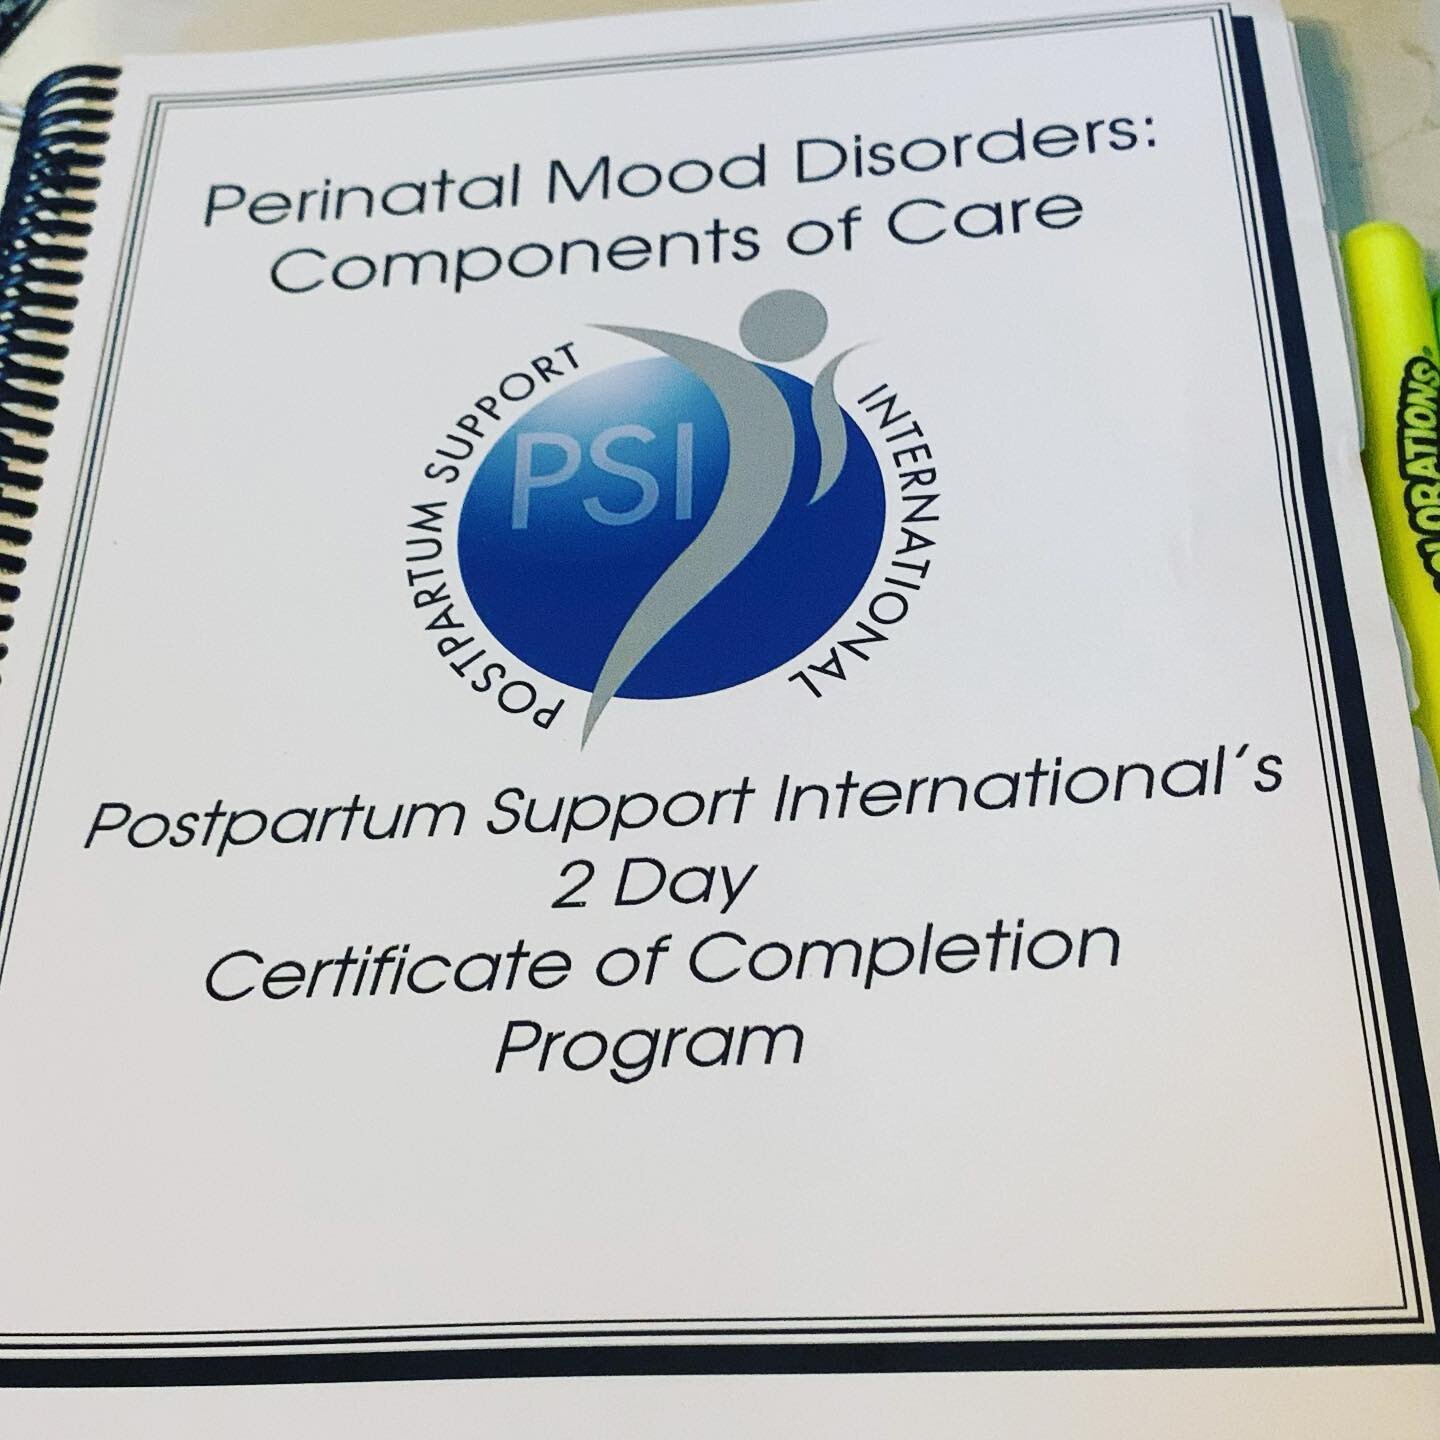 Happy Friday! I&rsquo;m kicking the weekend off with Day One of @postpartumsupportinternational training. I have been wanting to take this one for years and was finally able to find the time in my schedule (thank you virtual!) and the emotional capac